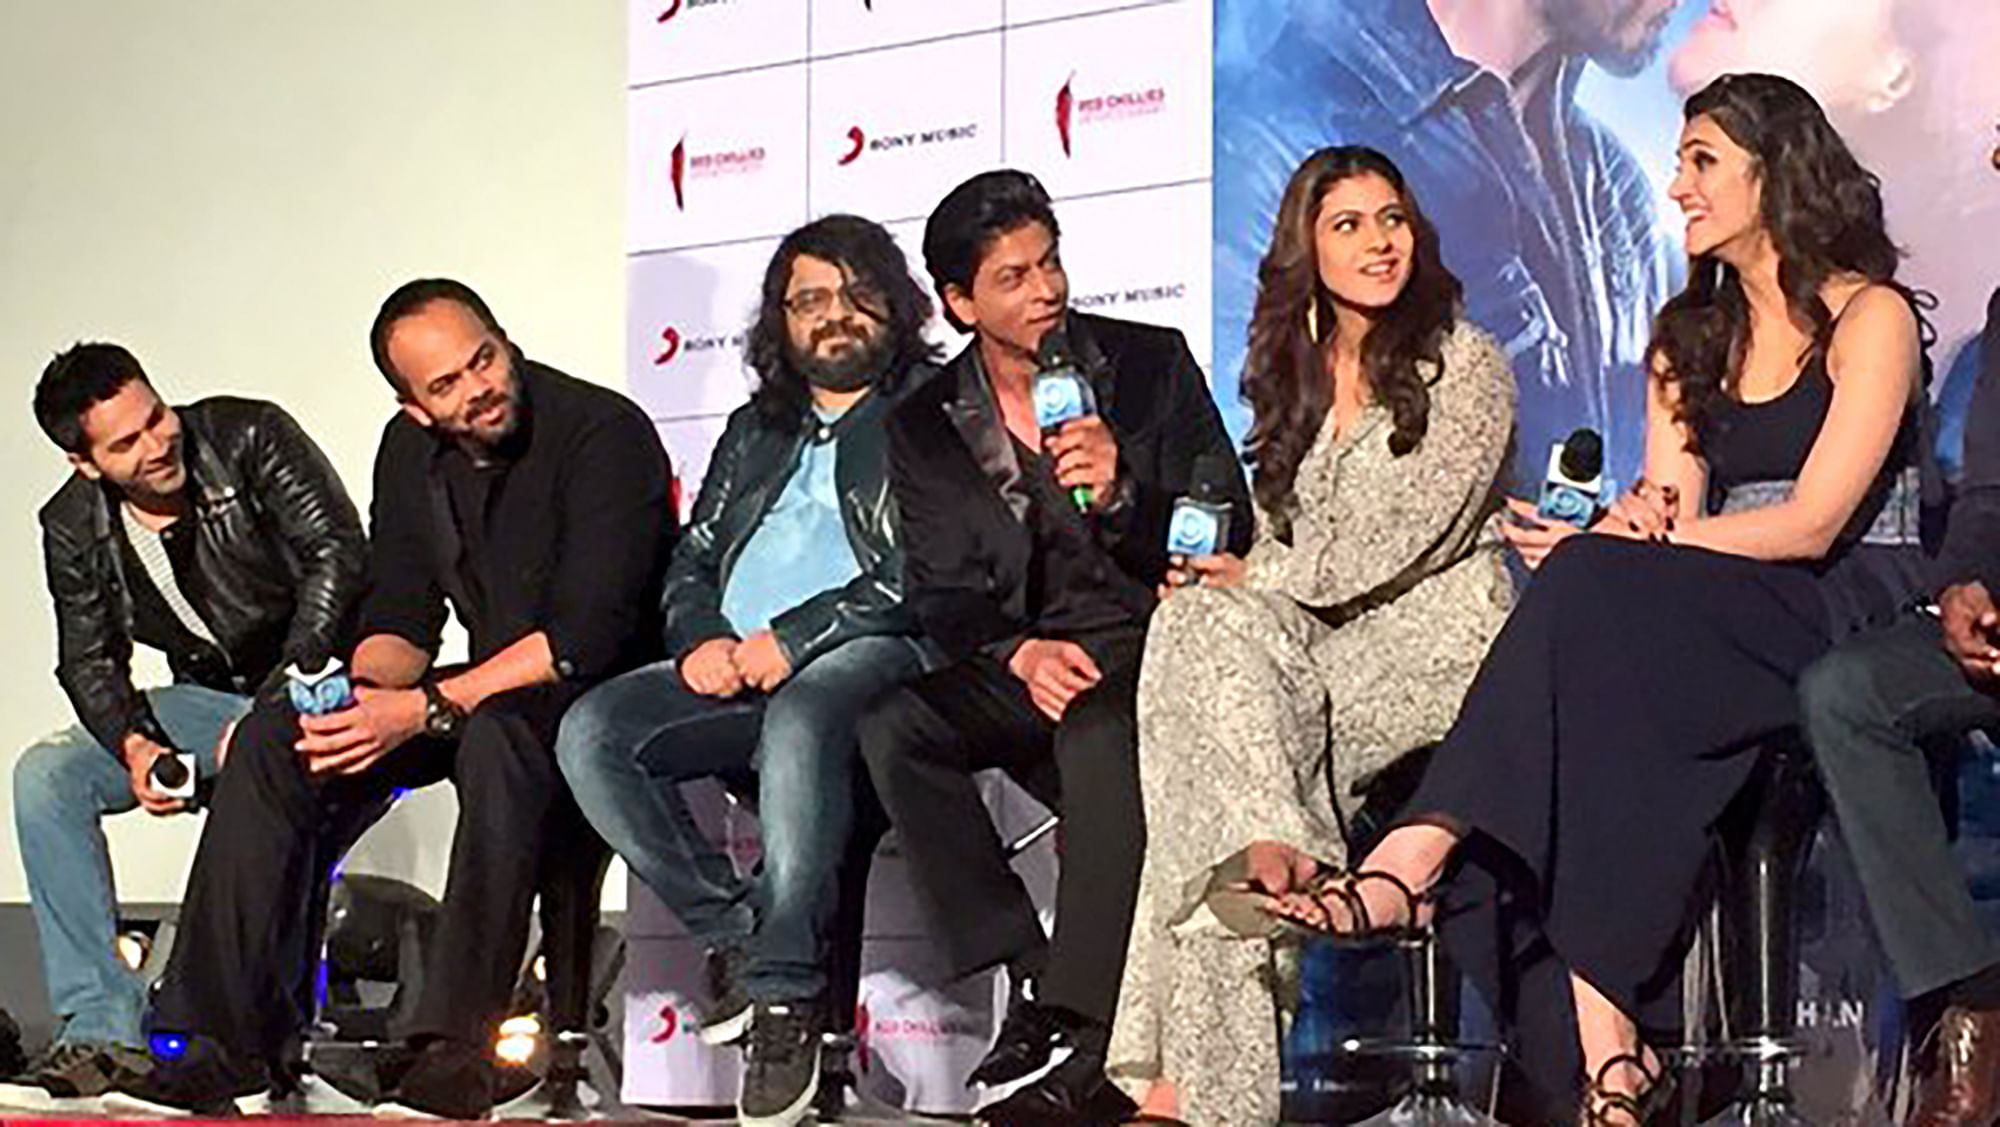 Events - SRK, Kajol, Varun, Kriti Launch 'Gerua' Song from 'Dilwale' Movie  Launch and Press Meet photos, images, gallery, clips and actors actress  stills - IndiaGlitz.com